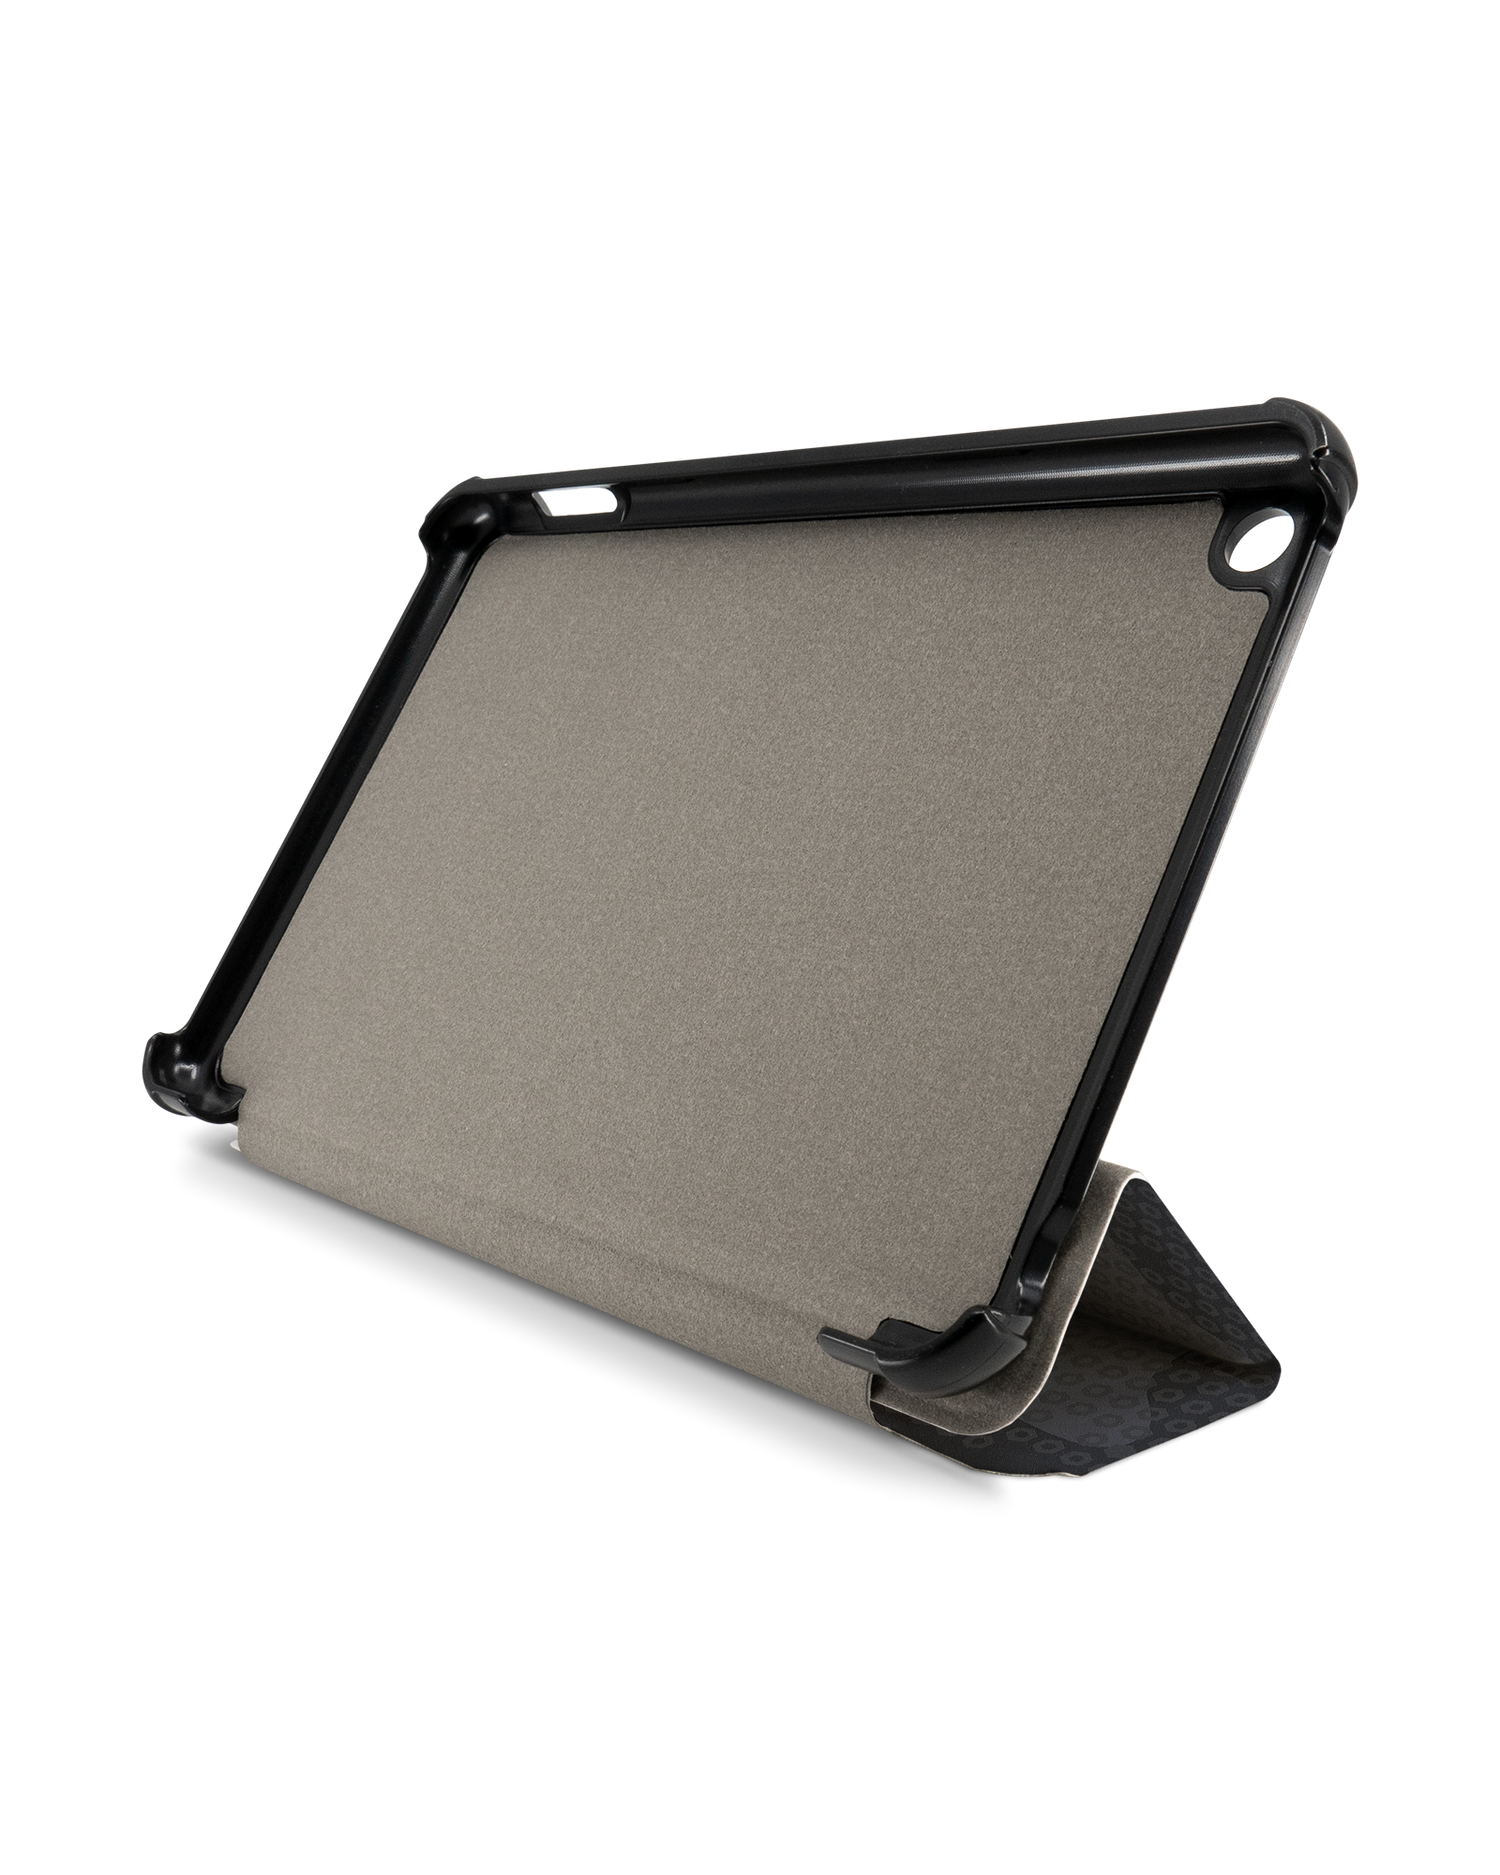 Spec Ops Dark Tablet Smart Case for Amazon Fire 7 (2022): Front View